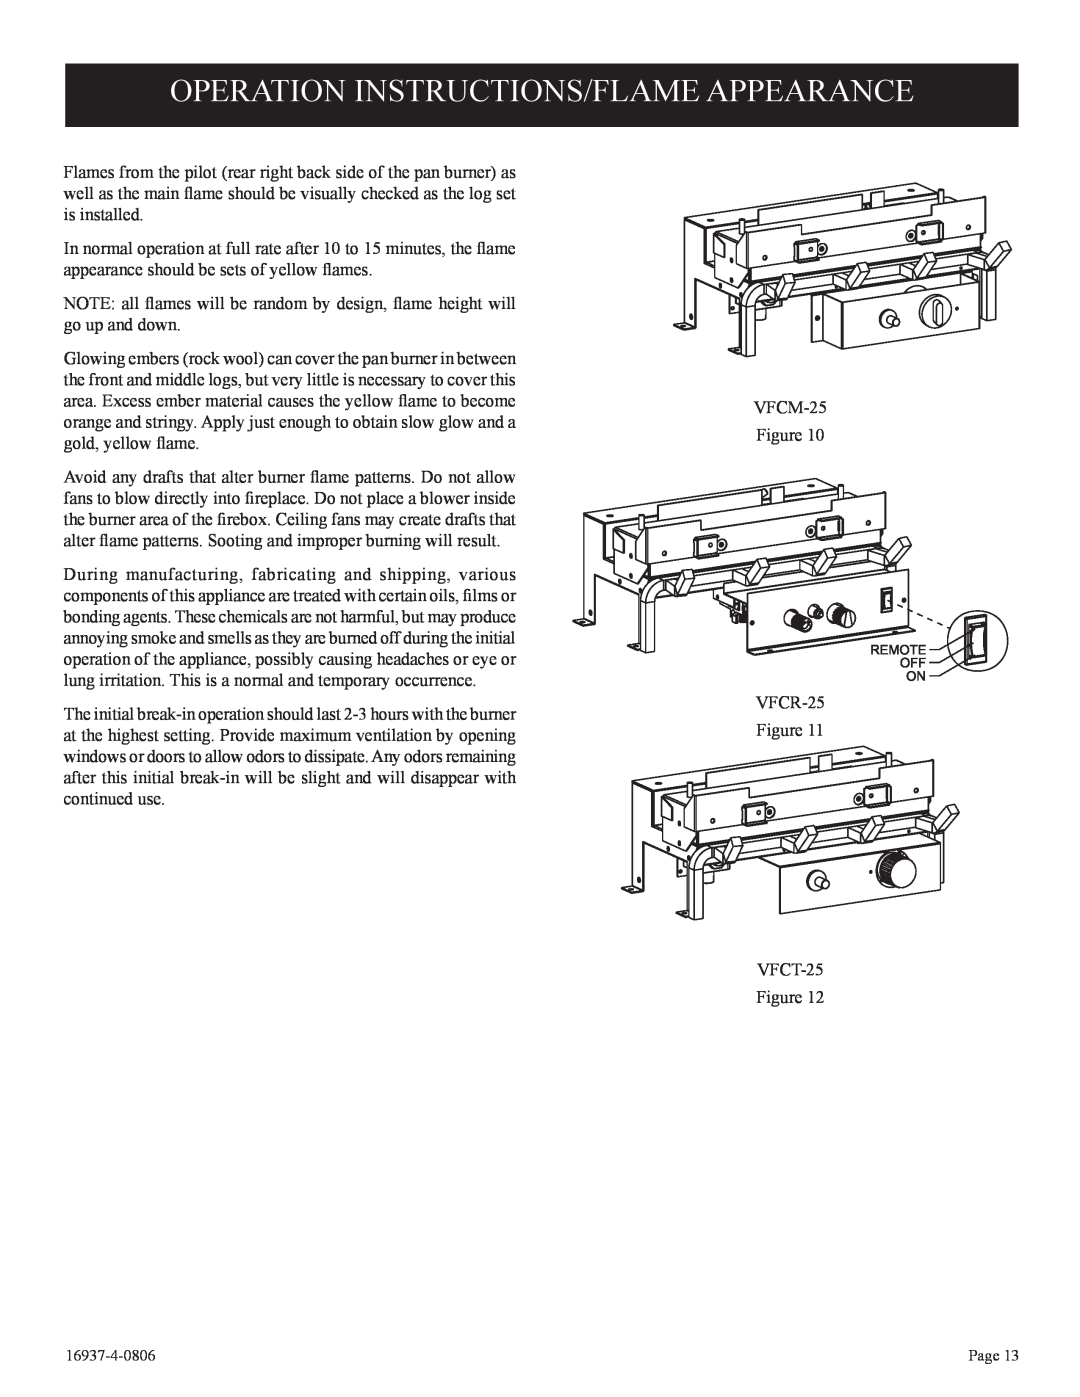 Empire Comfort Systems VFCM-25-3. VFCR-25-3, VFCT25-3 installation instructions Operation Instructions/Flame Appearance 